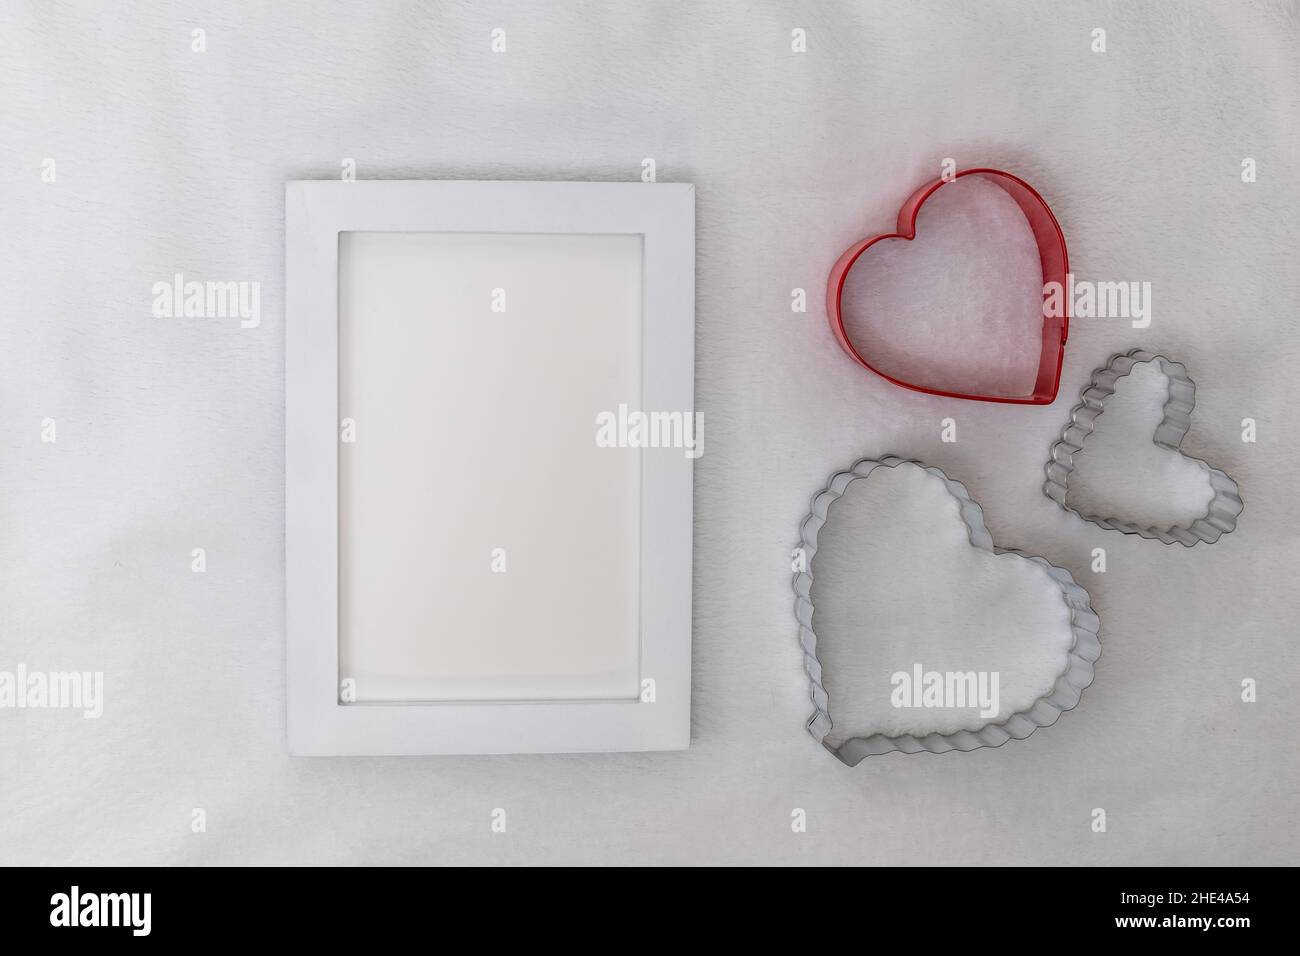 White frame mockup on white plush background with heart shapes flat lay for Valentine's Day, Mother's Day, Anniversary, add your text, logo, artwork Stock Photo